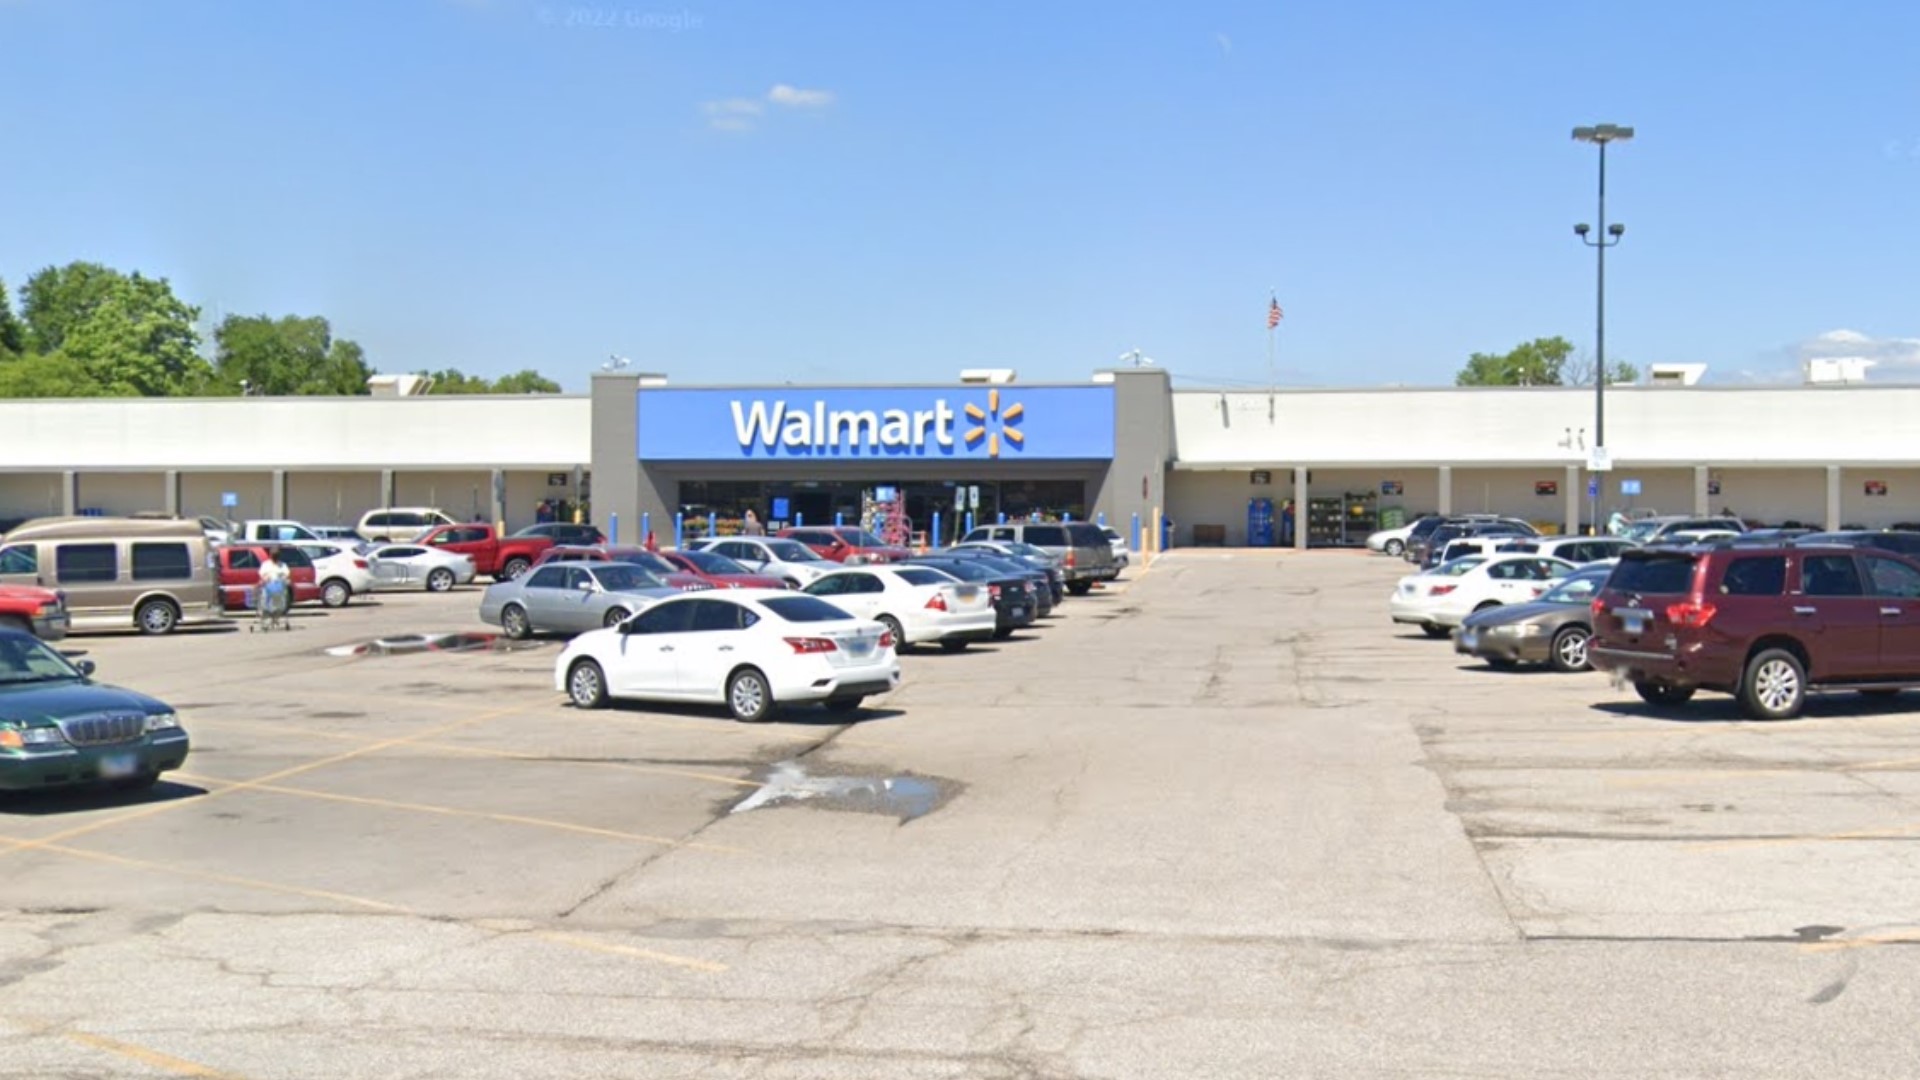 A Walmart spokesperson said the decision was not made lightly. The nearest Walmart location is 12 miles away at Interstate 255 and Telegraph Road.